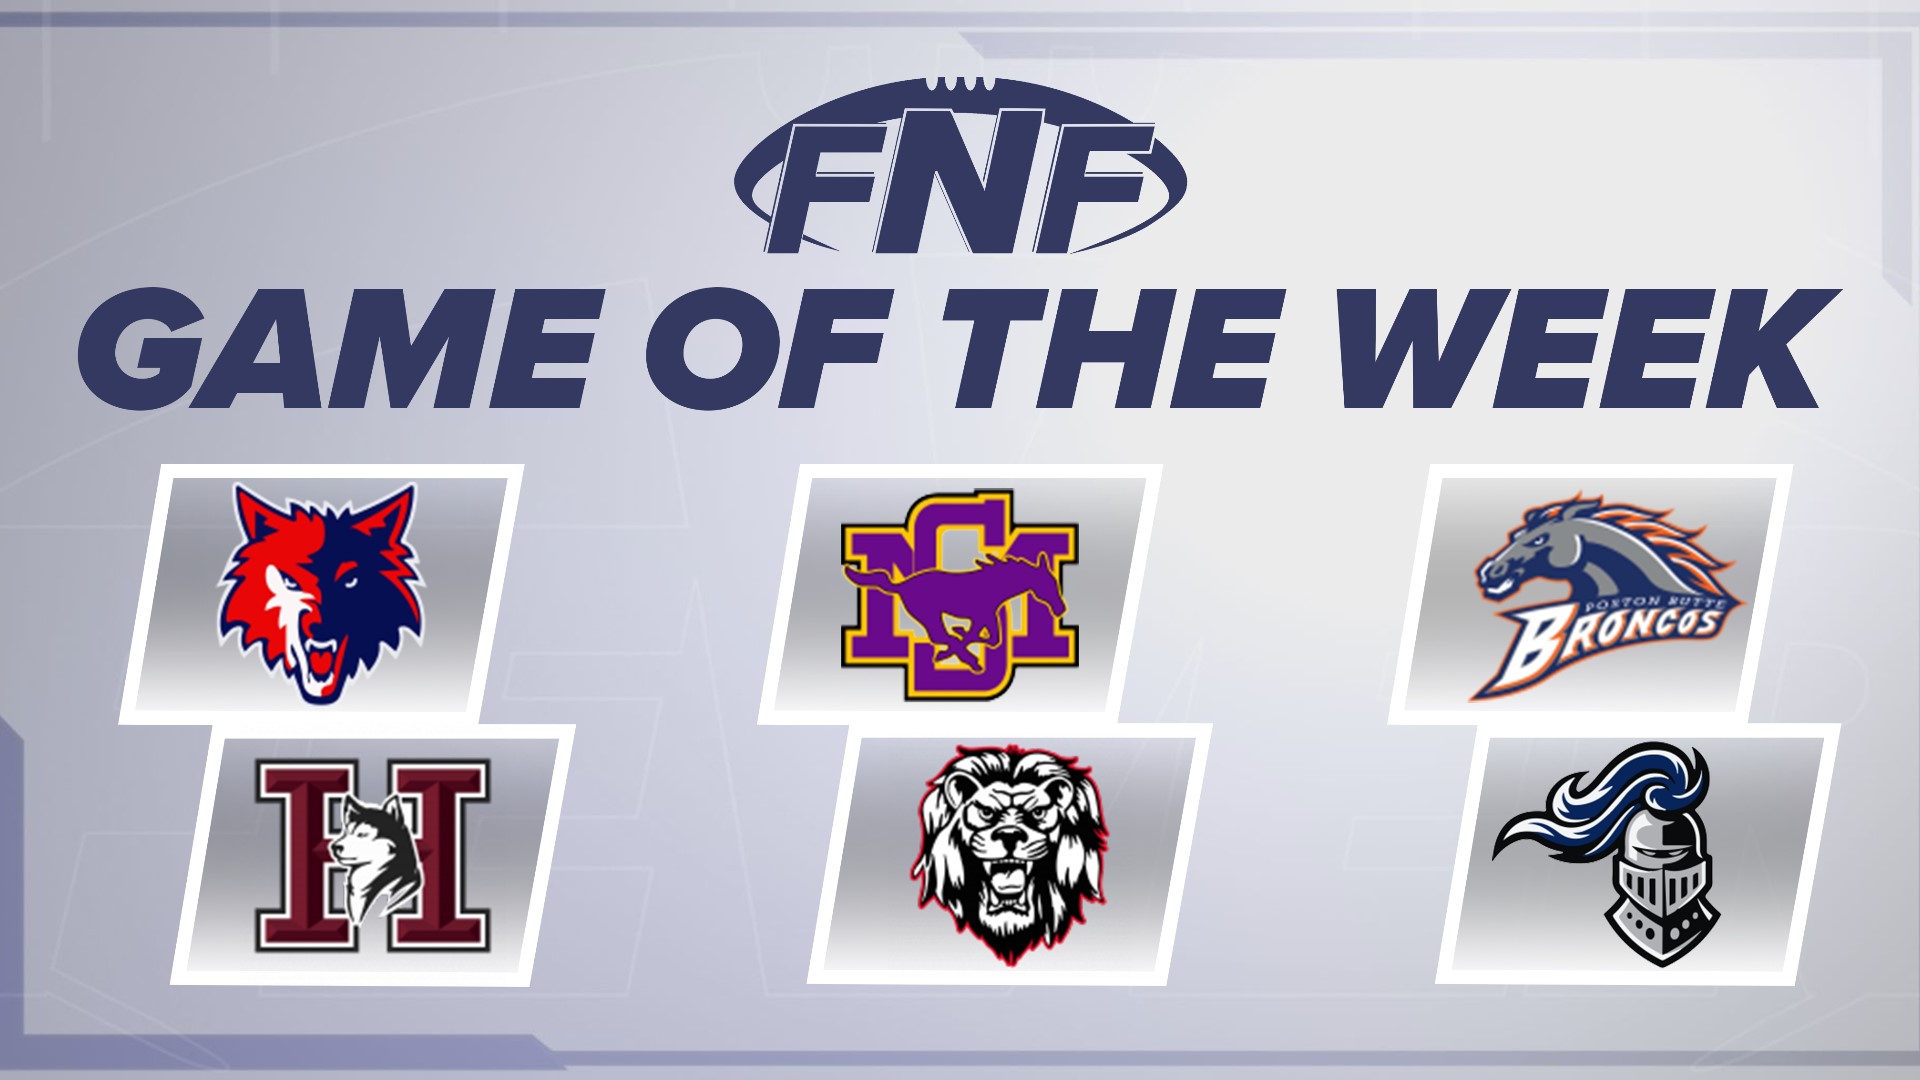 Season 33 of Friday Night Fever is beginning with a big change as you, the fans, now get to choose our Game of the Week! Vote for your favorite game here!